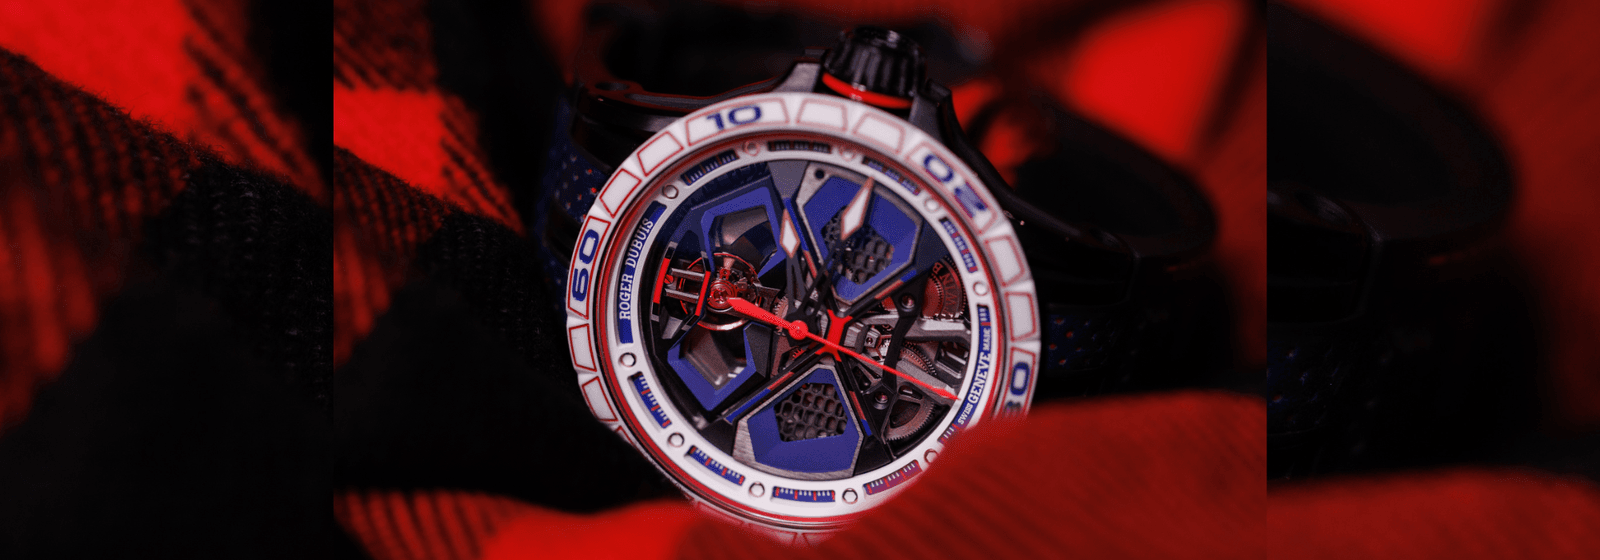 Make It A December To Remember With The Roger Dubuis Excalibur Spider Monobalancier Huracán